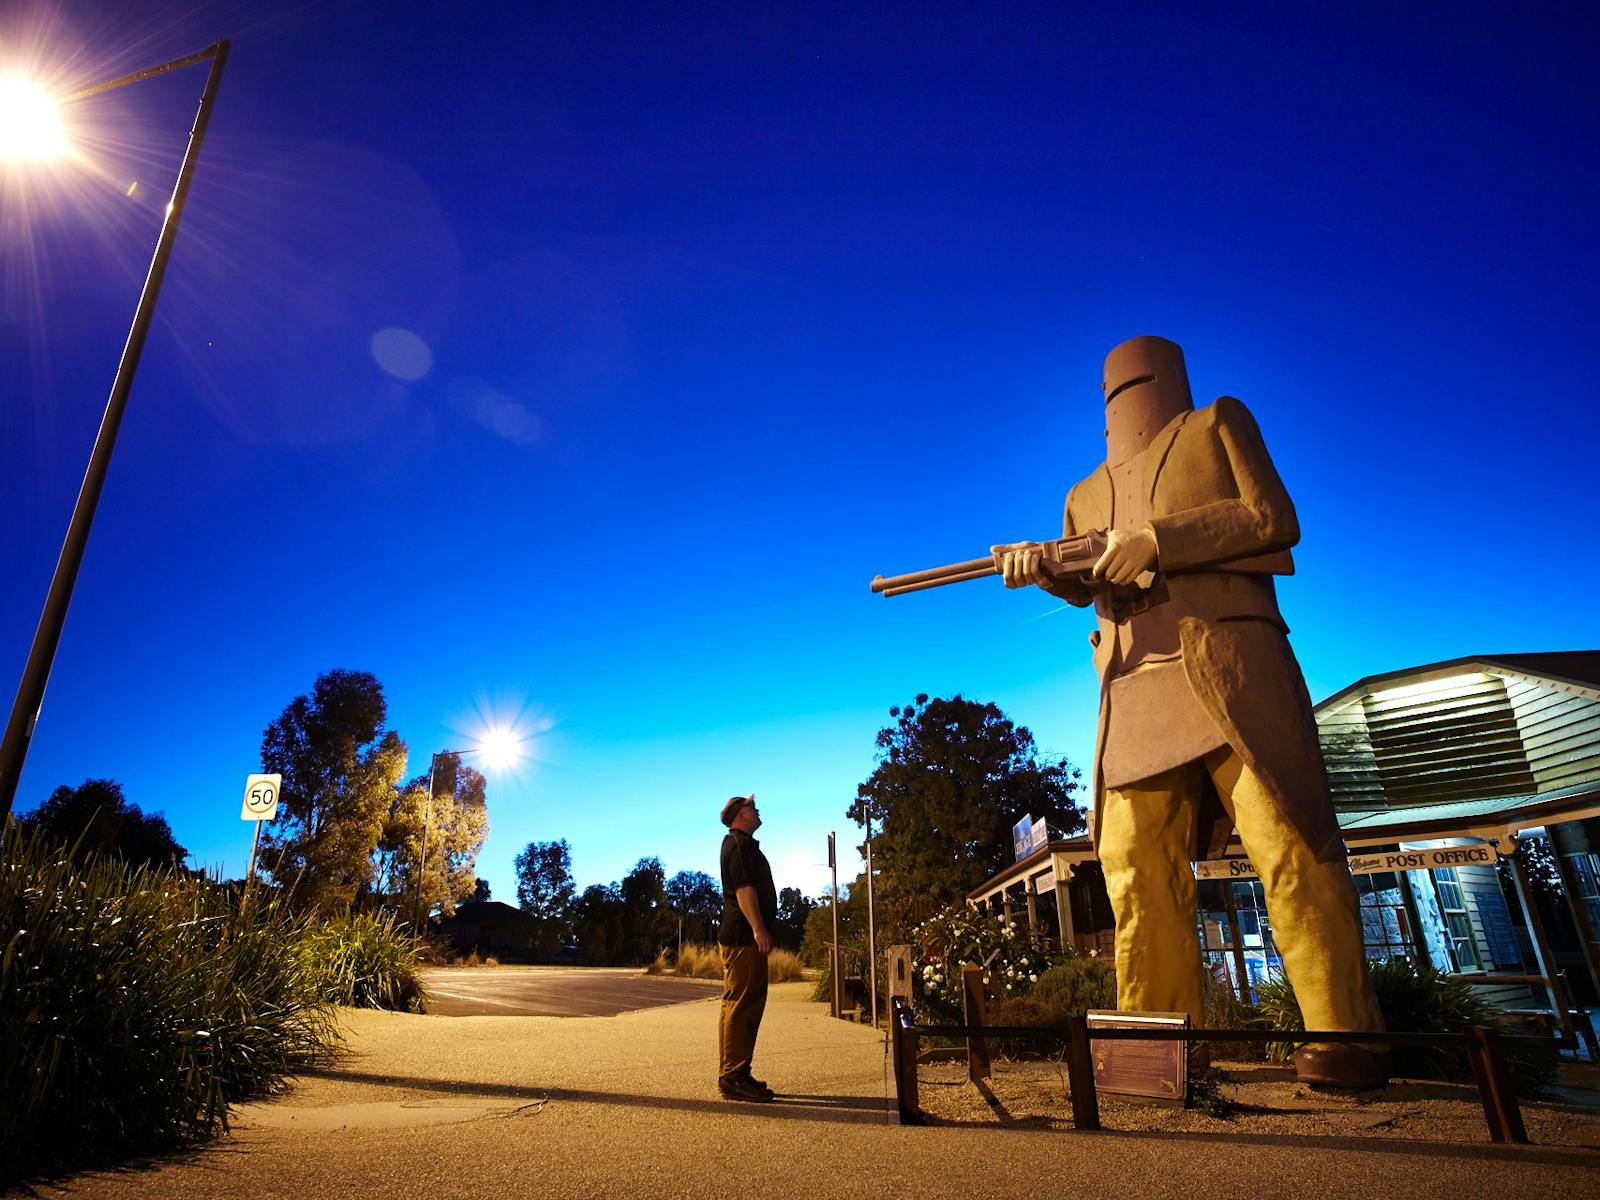 Man standing in front of Ned Kelly Statue at sunset, street lights on